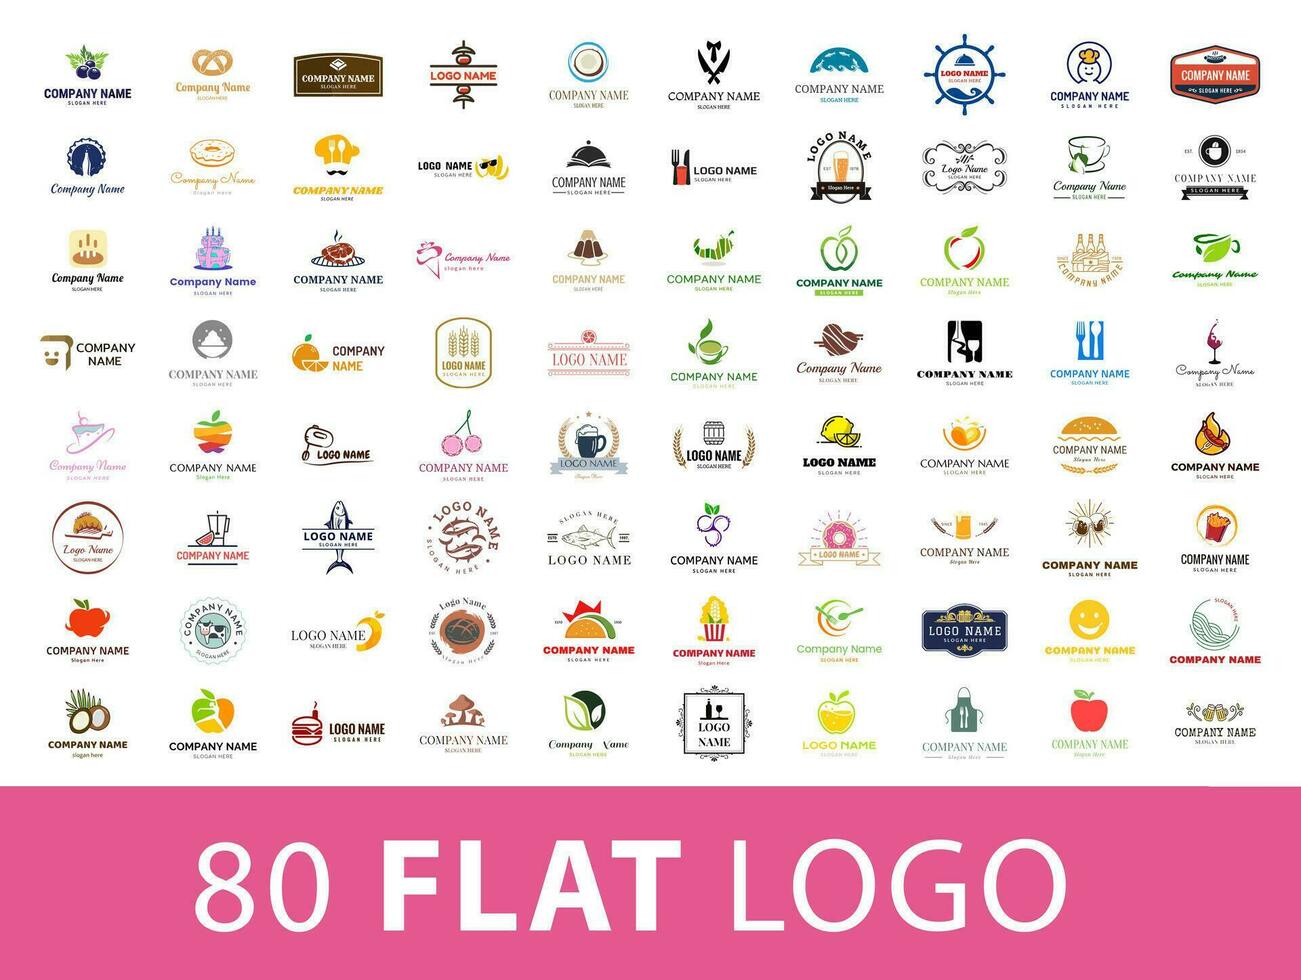 Logo mega collection. Food and drink vector logo set on various topics.